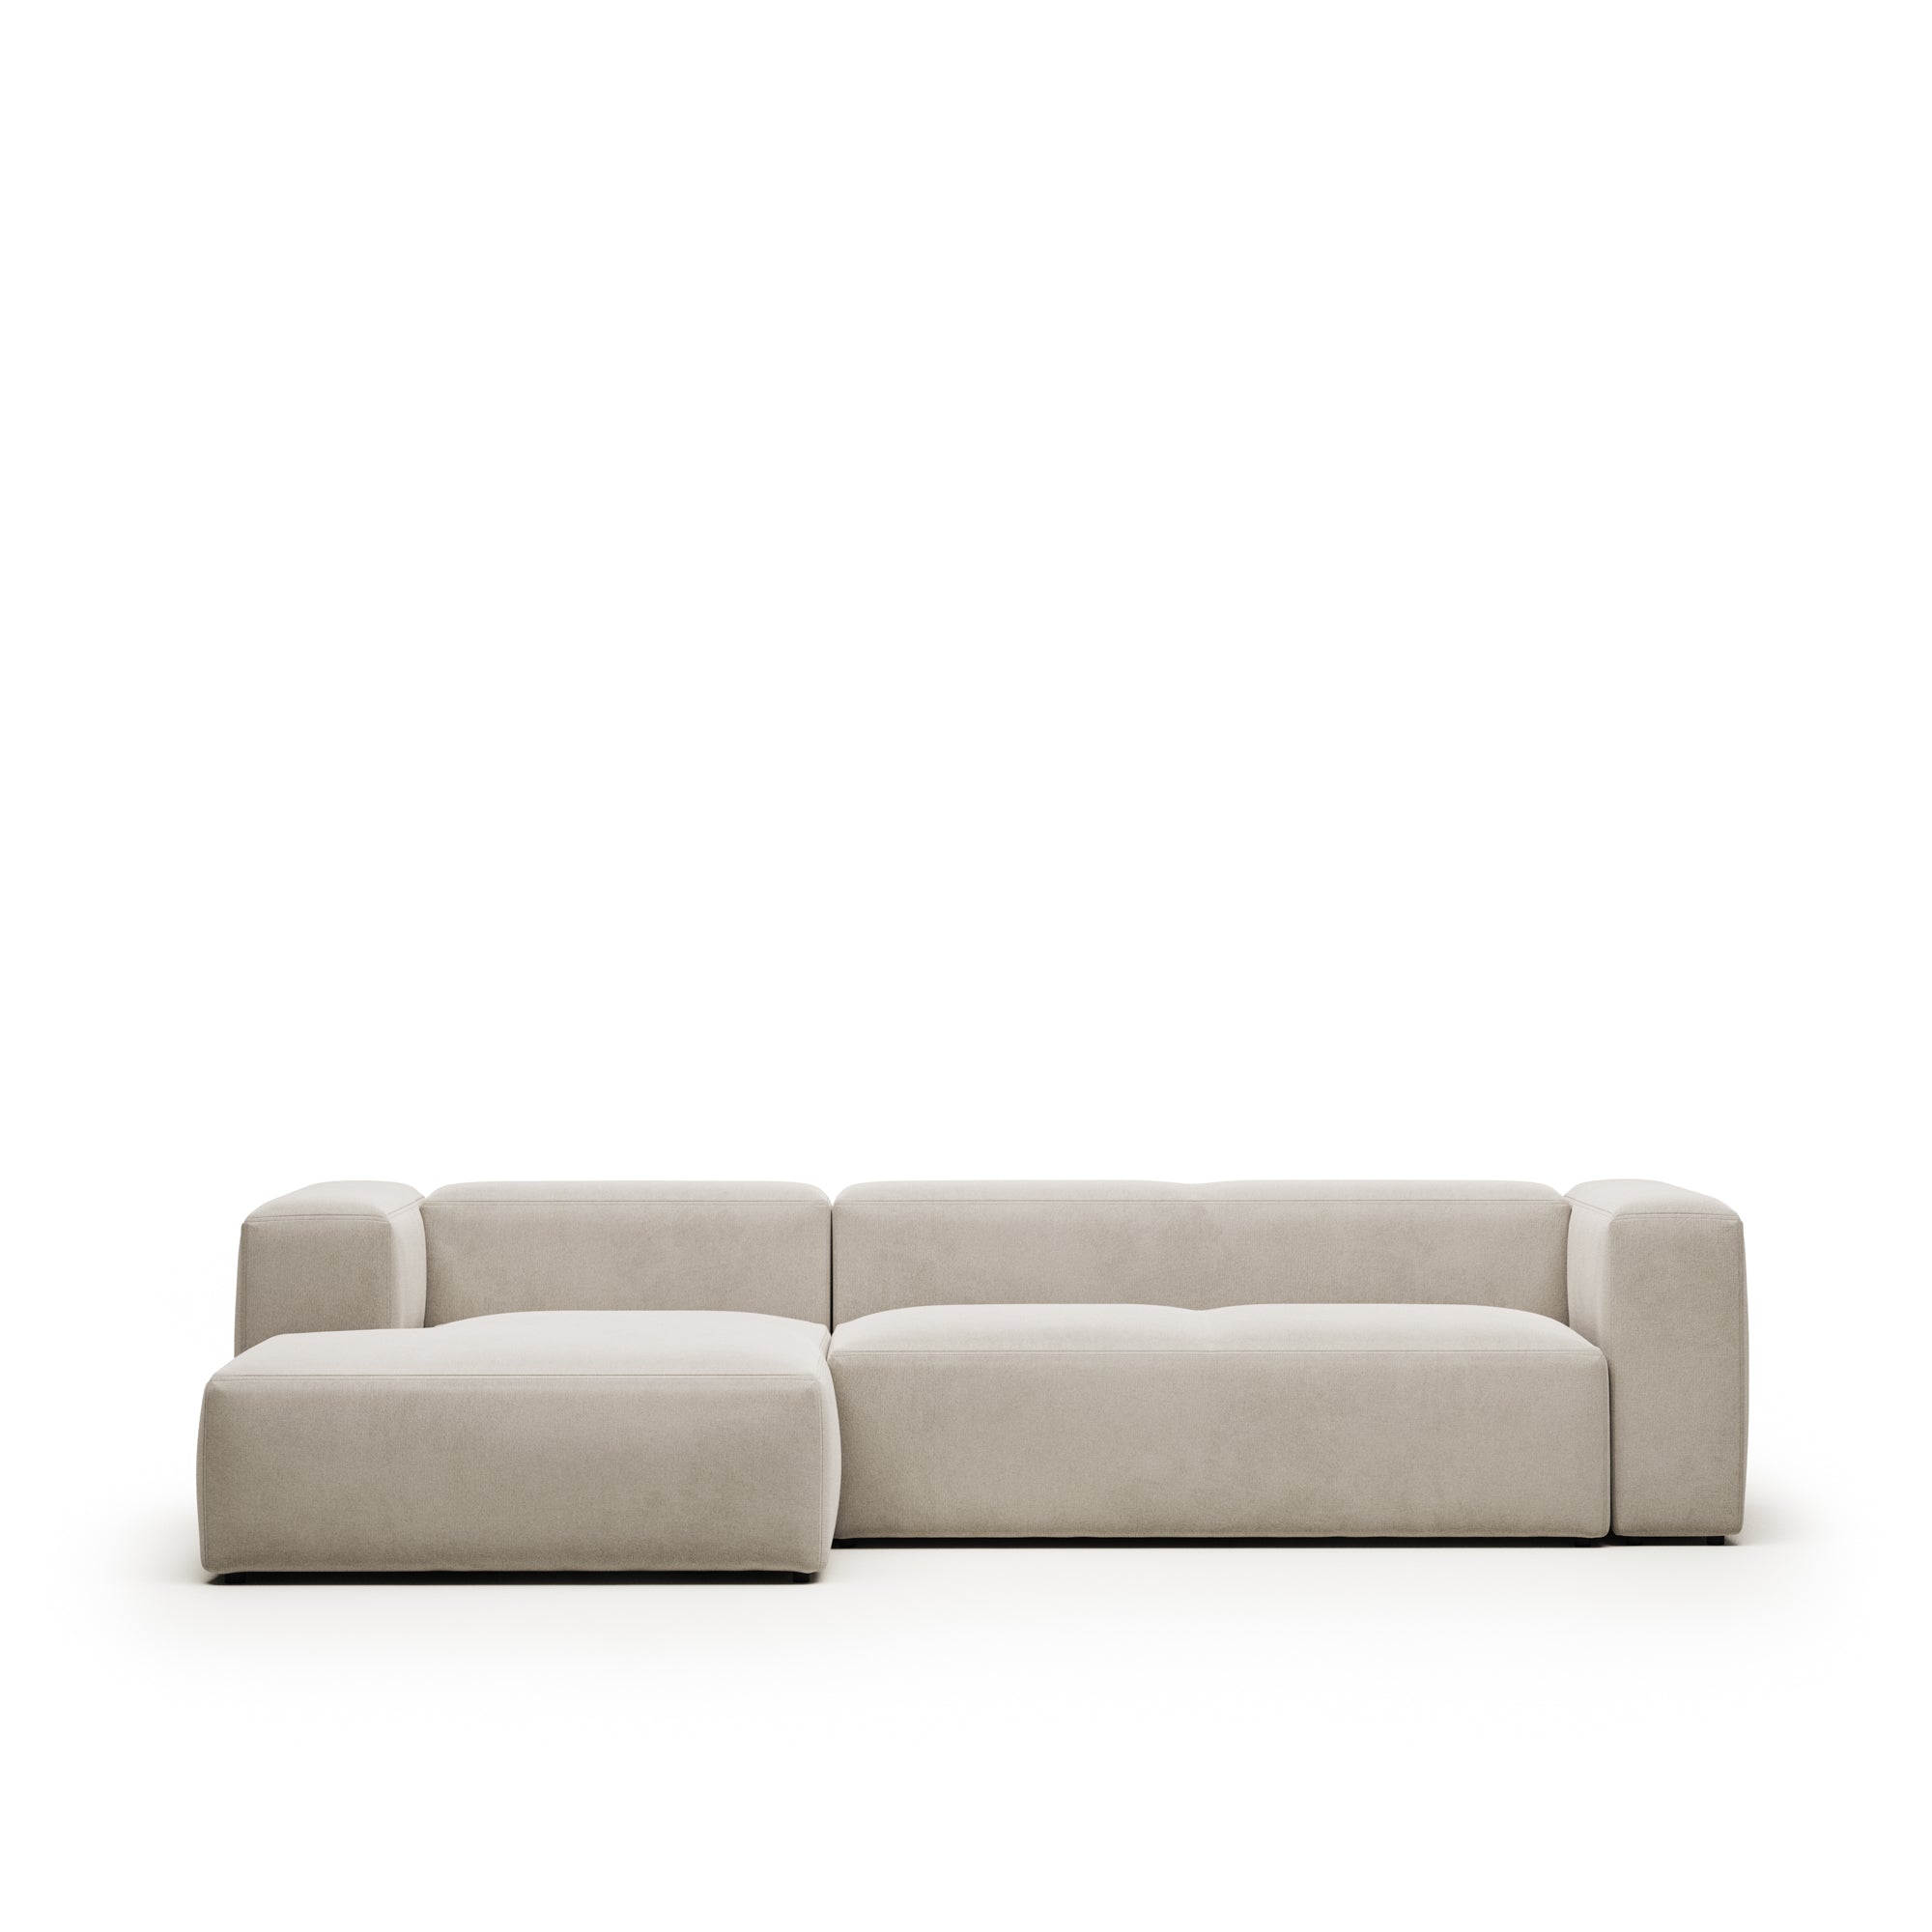 Blok 3 seater sofa with left-hand chaise longue in beige, 300 cm